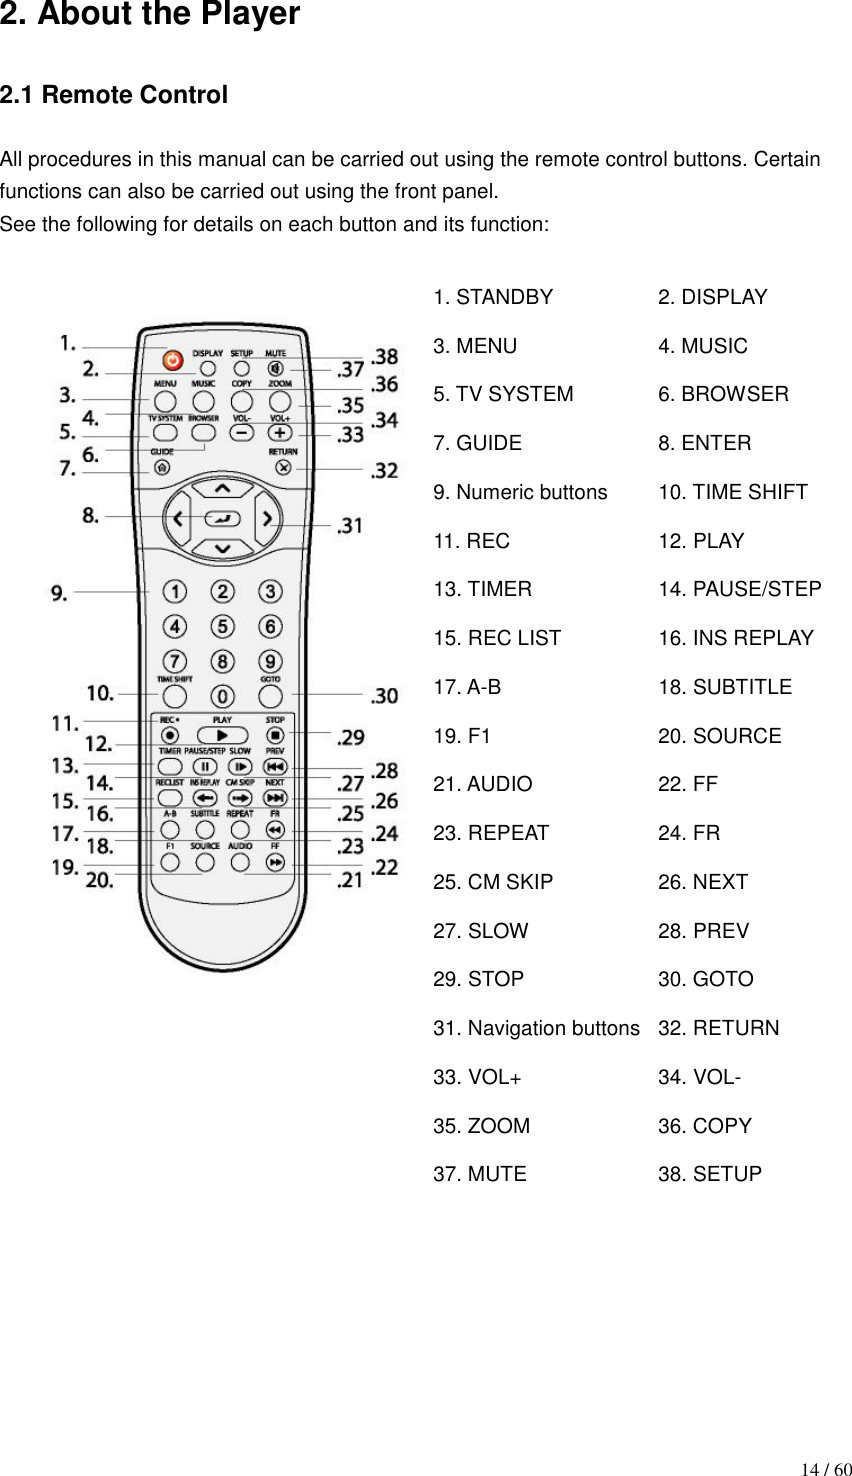                                           14 / 60 2. About the Player      2.1 Remote Control  All procedures in this manual can be carried out using the remote control buttons. Certain functions can also be carried out using the front panel. See the following for details on each button and its function:   1. STANDBY 2. DISPLAY 3. MENU 4. MUSIC 5. TV SYSTEM 6. BROWSER 7. GUIDE 8. ENTER 9. Numeric buttons 10. TIME SHIFT 11. REC 12. PLAY 13. TIMER 14. PAUSE/STEP 15. REC LIST 16. INS REPLAY 17. A-B 18. SUBTITLE 19. F1 20. SOURCE 21. AUDIO 22. FF 23. REPEAT 24. FR 25. CM SKIP 26. NEXT 27. SLOW 28. PREV 29. STOP 30. GOTO 31. Navigation buttons 32. RETURN 33. VOL+ 34. VOL- 35. ZOOM 36. COPY 37. MUTE 38. SETUP         